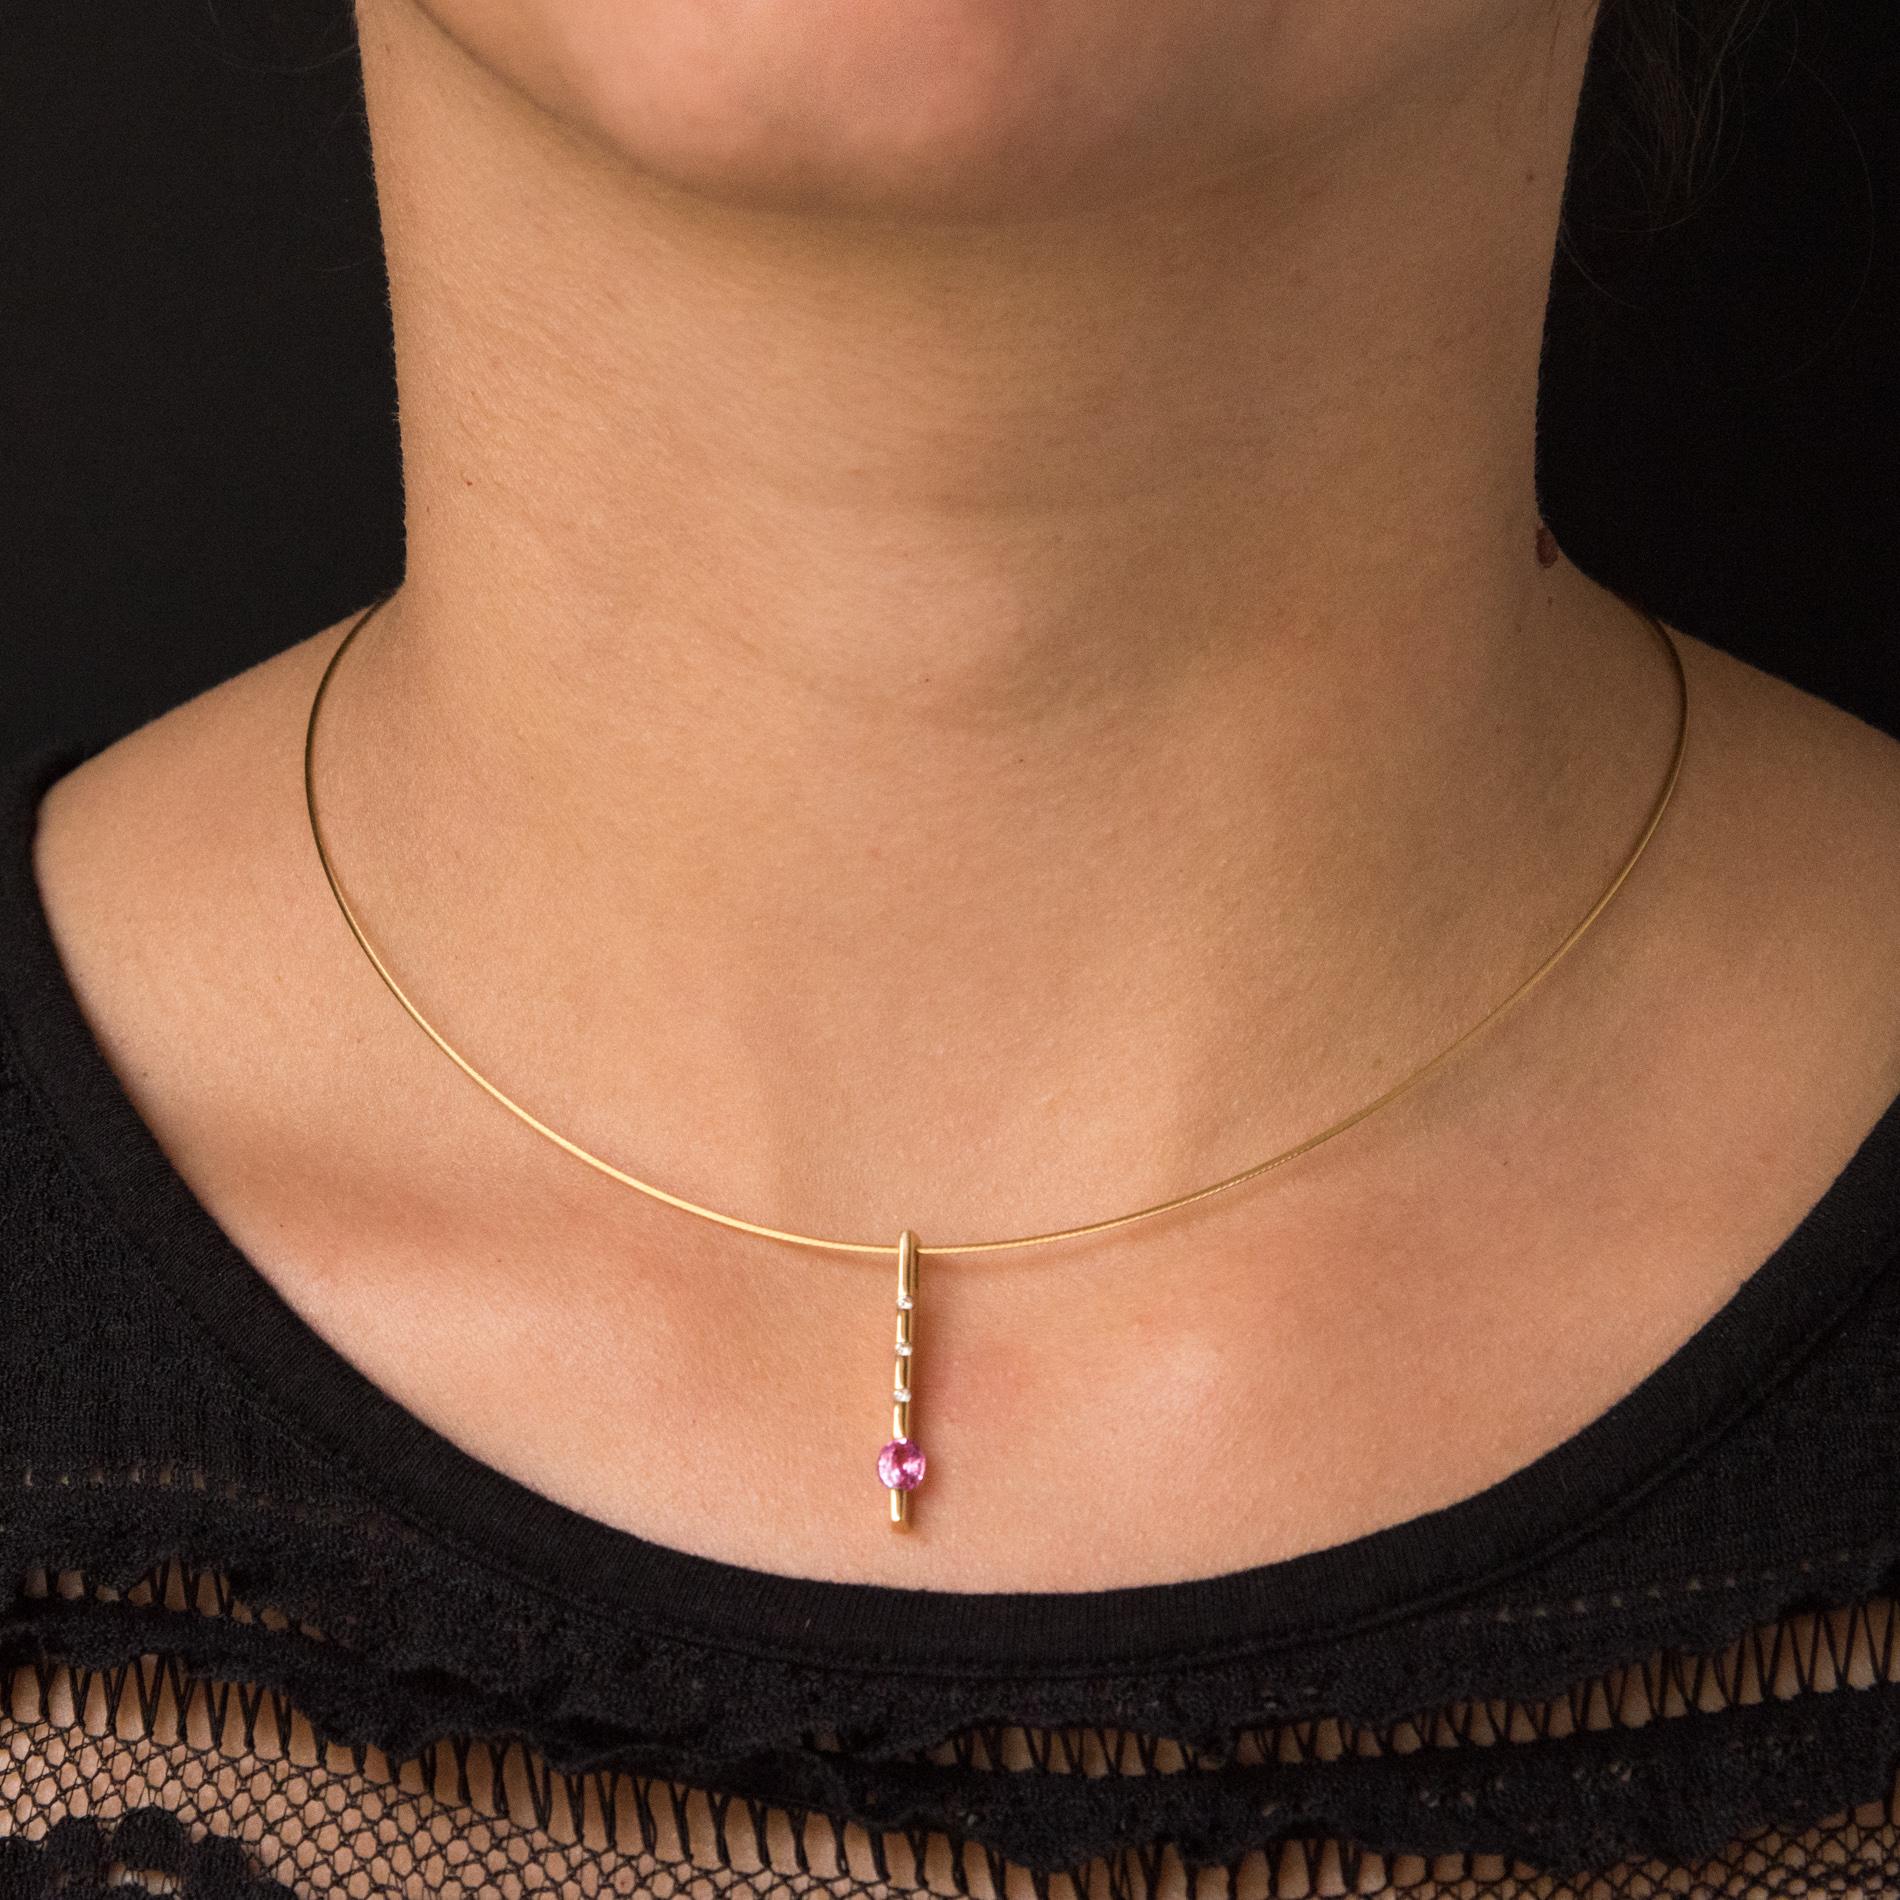 Necklace in 18 karats yellow gold.
Composed of a yellow gold cable chain, this necklace holds a pendant made of a gold barrette on which are set a line of 3 modern brilliant- cut diamonds and an oval pink sapphire. The clasp is a carabiner.
Total